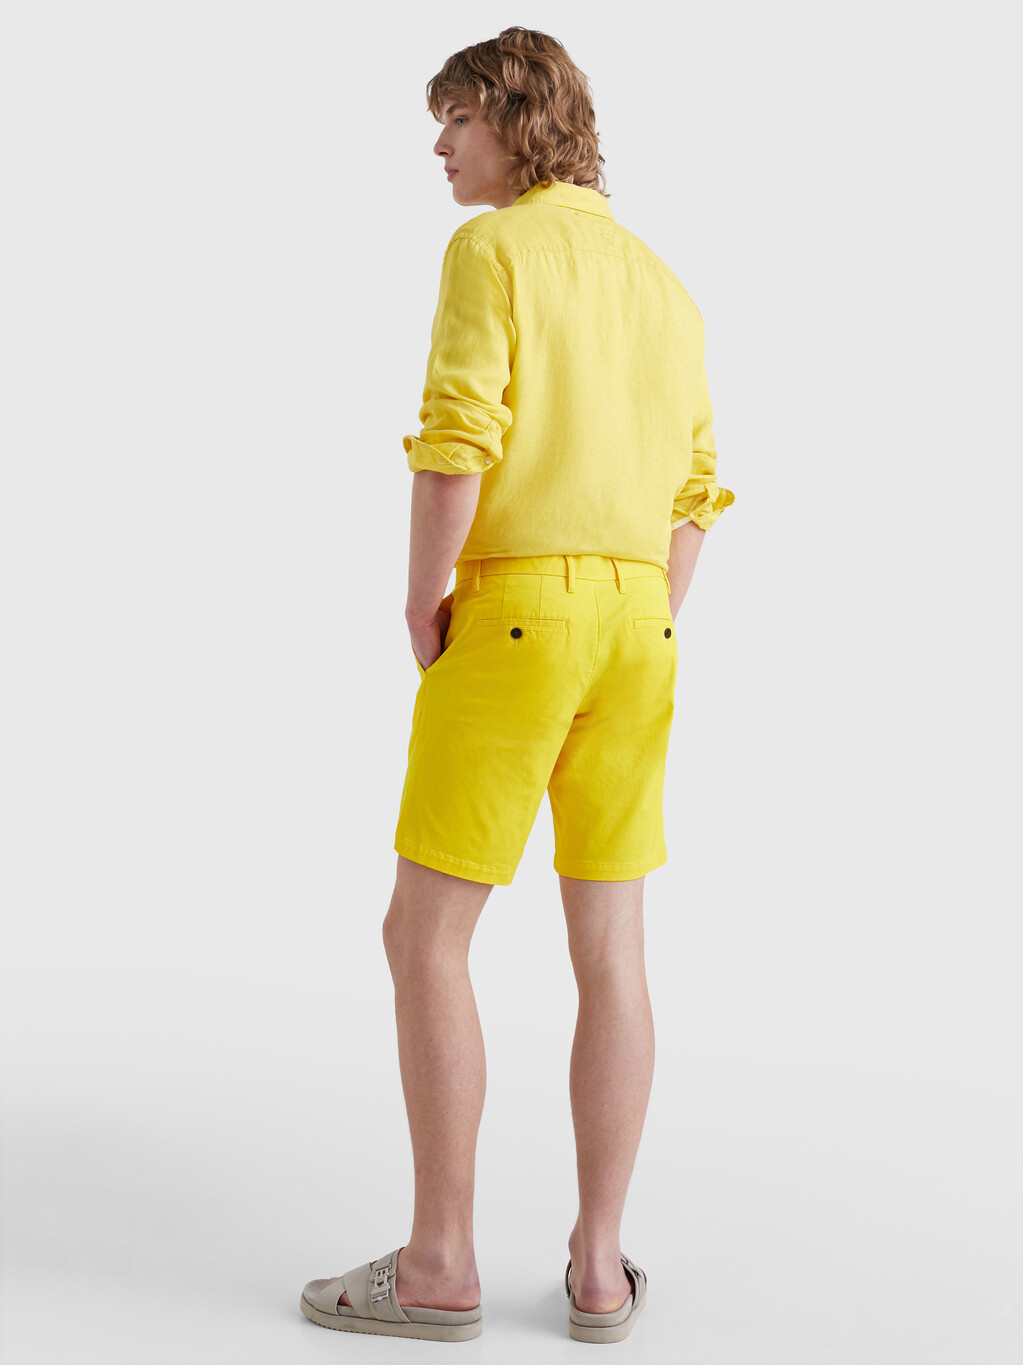 1985 Collection Brooklyn Twill Shorts, yellow